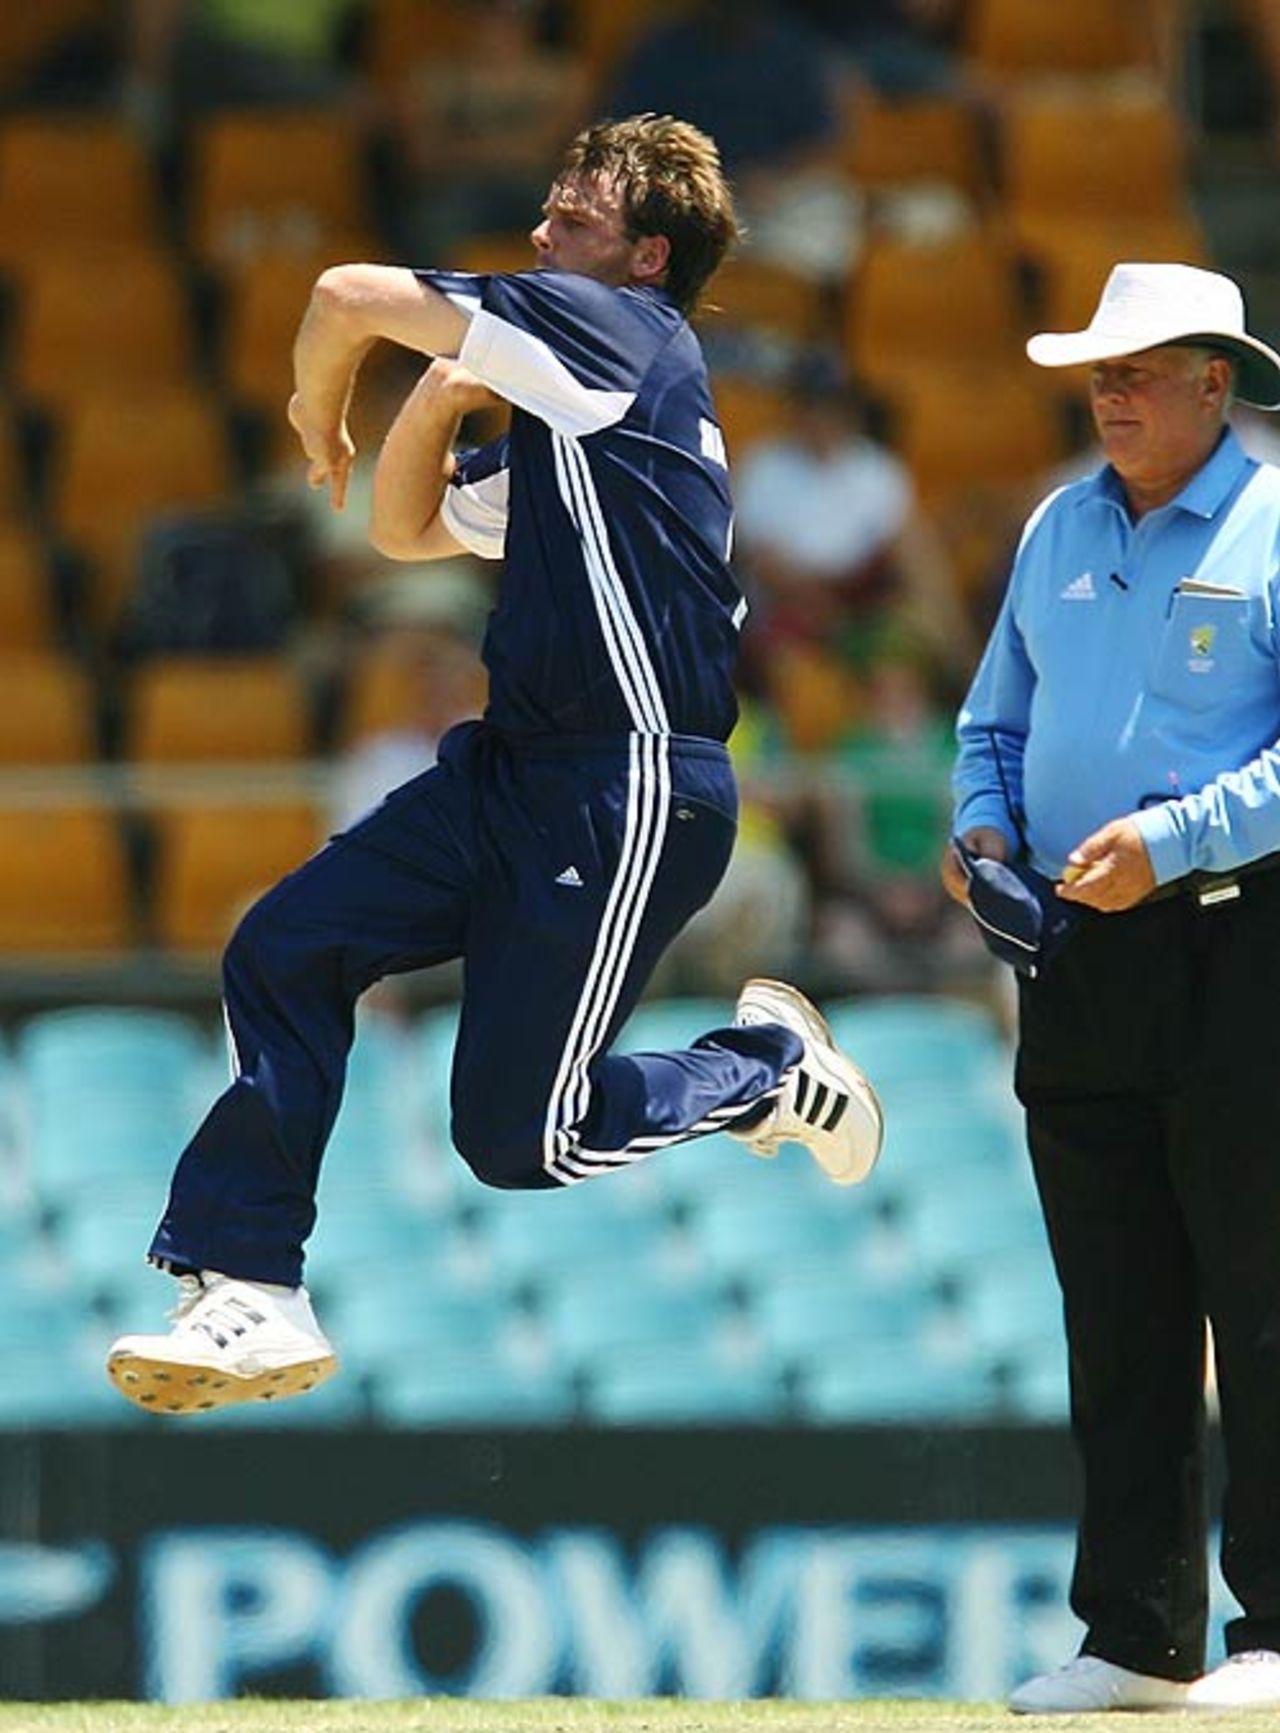 Shane Harwood bowls during his impressive ten-over spell of 1 for 29, New South Wales v Victoria, Ford Ranger Cup, Canberra, December 10, 2006